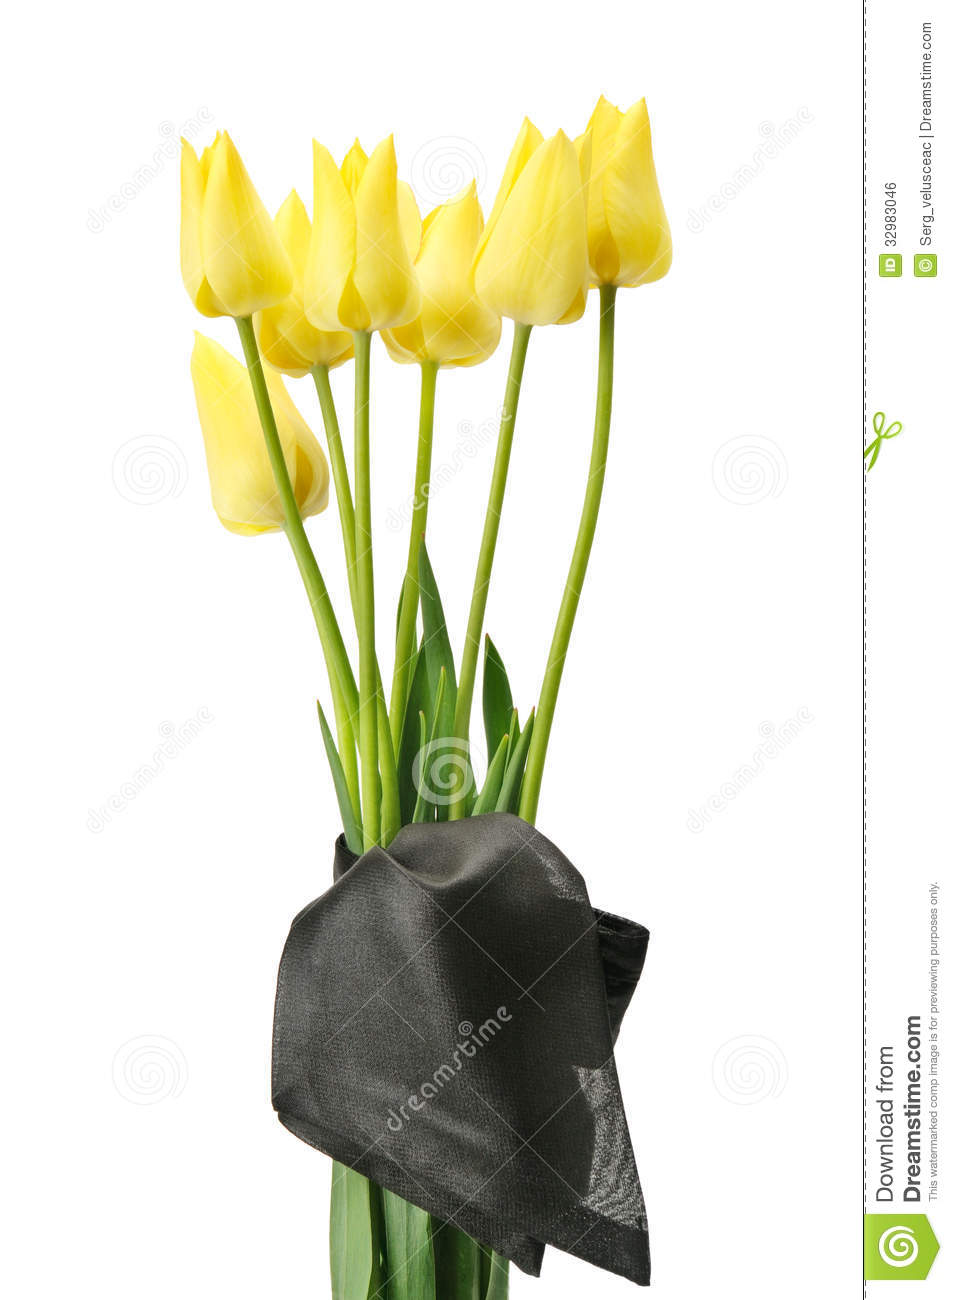 Bouquet Of Yellow Flowers For A Funeral Isolated On A White Background    